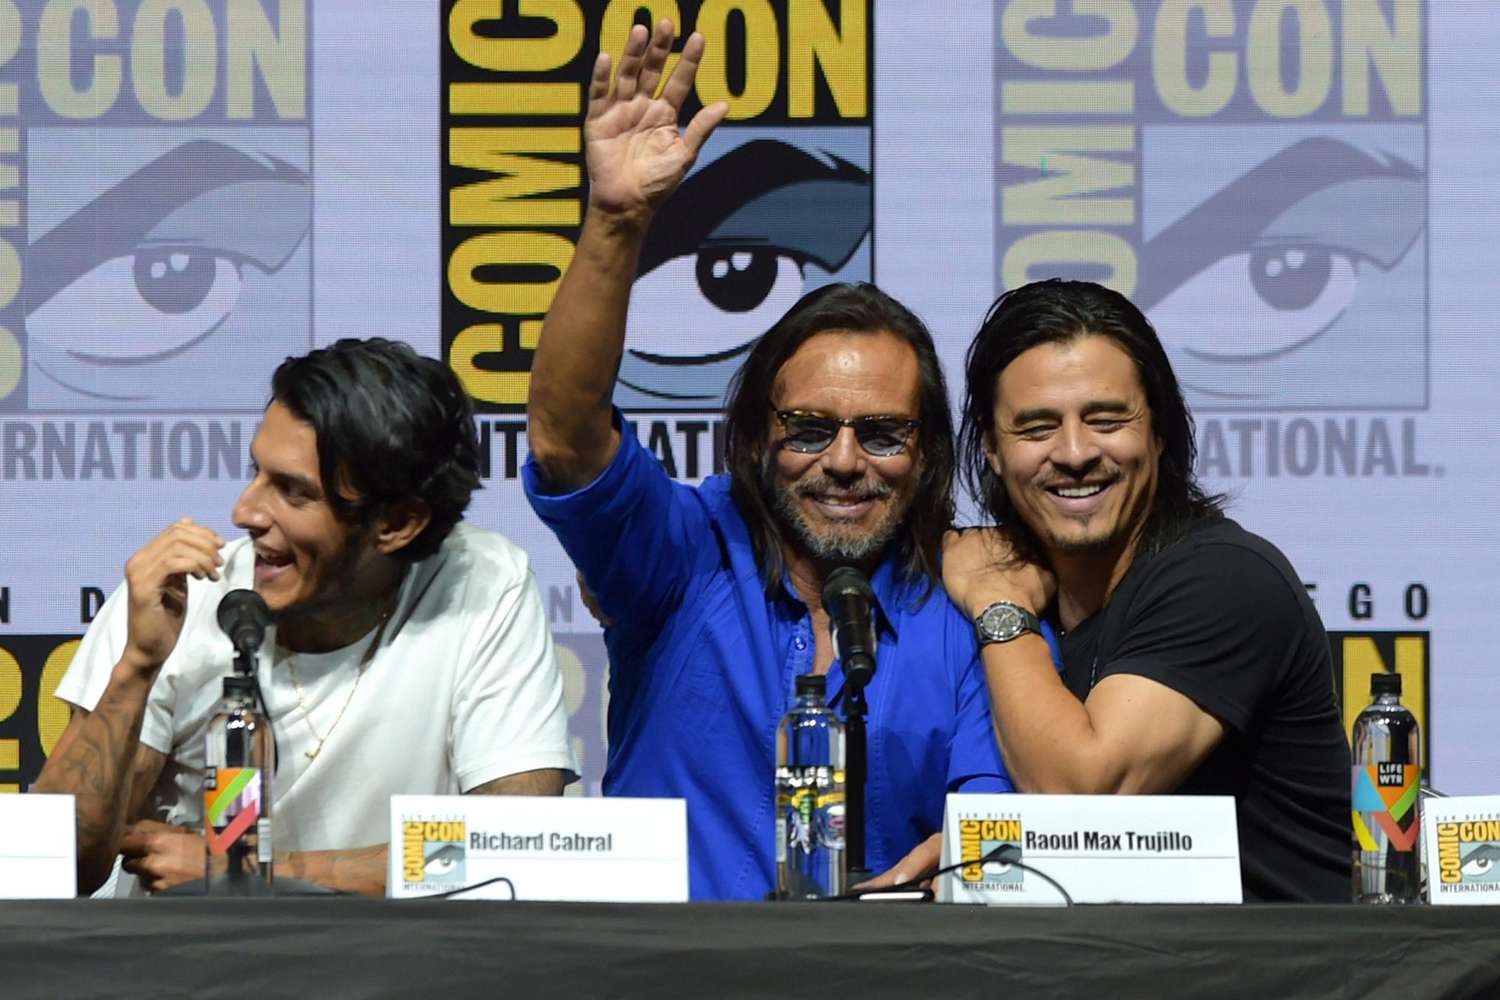 Comic-Con International 2018 - "Mayans M.C." Discussion And Q&A